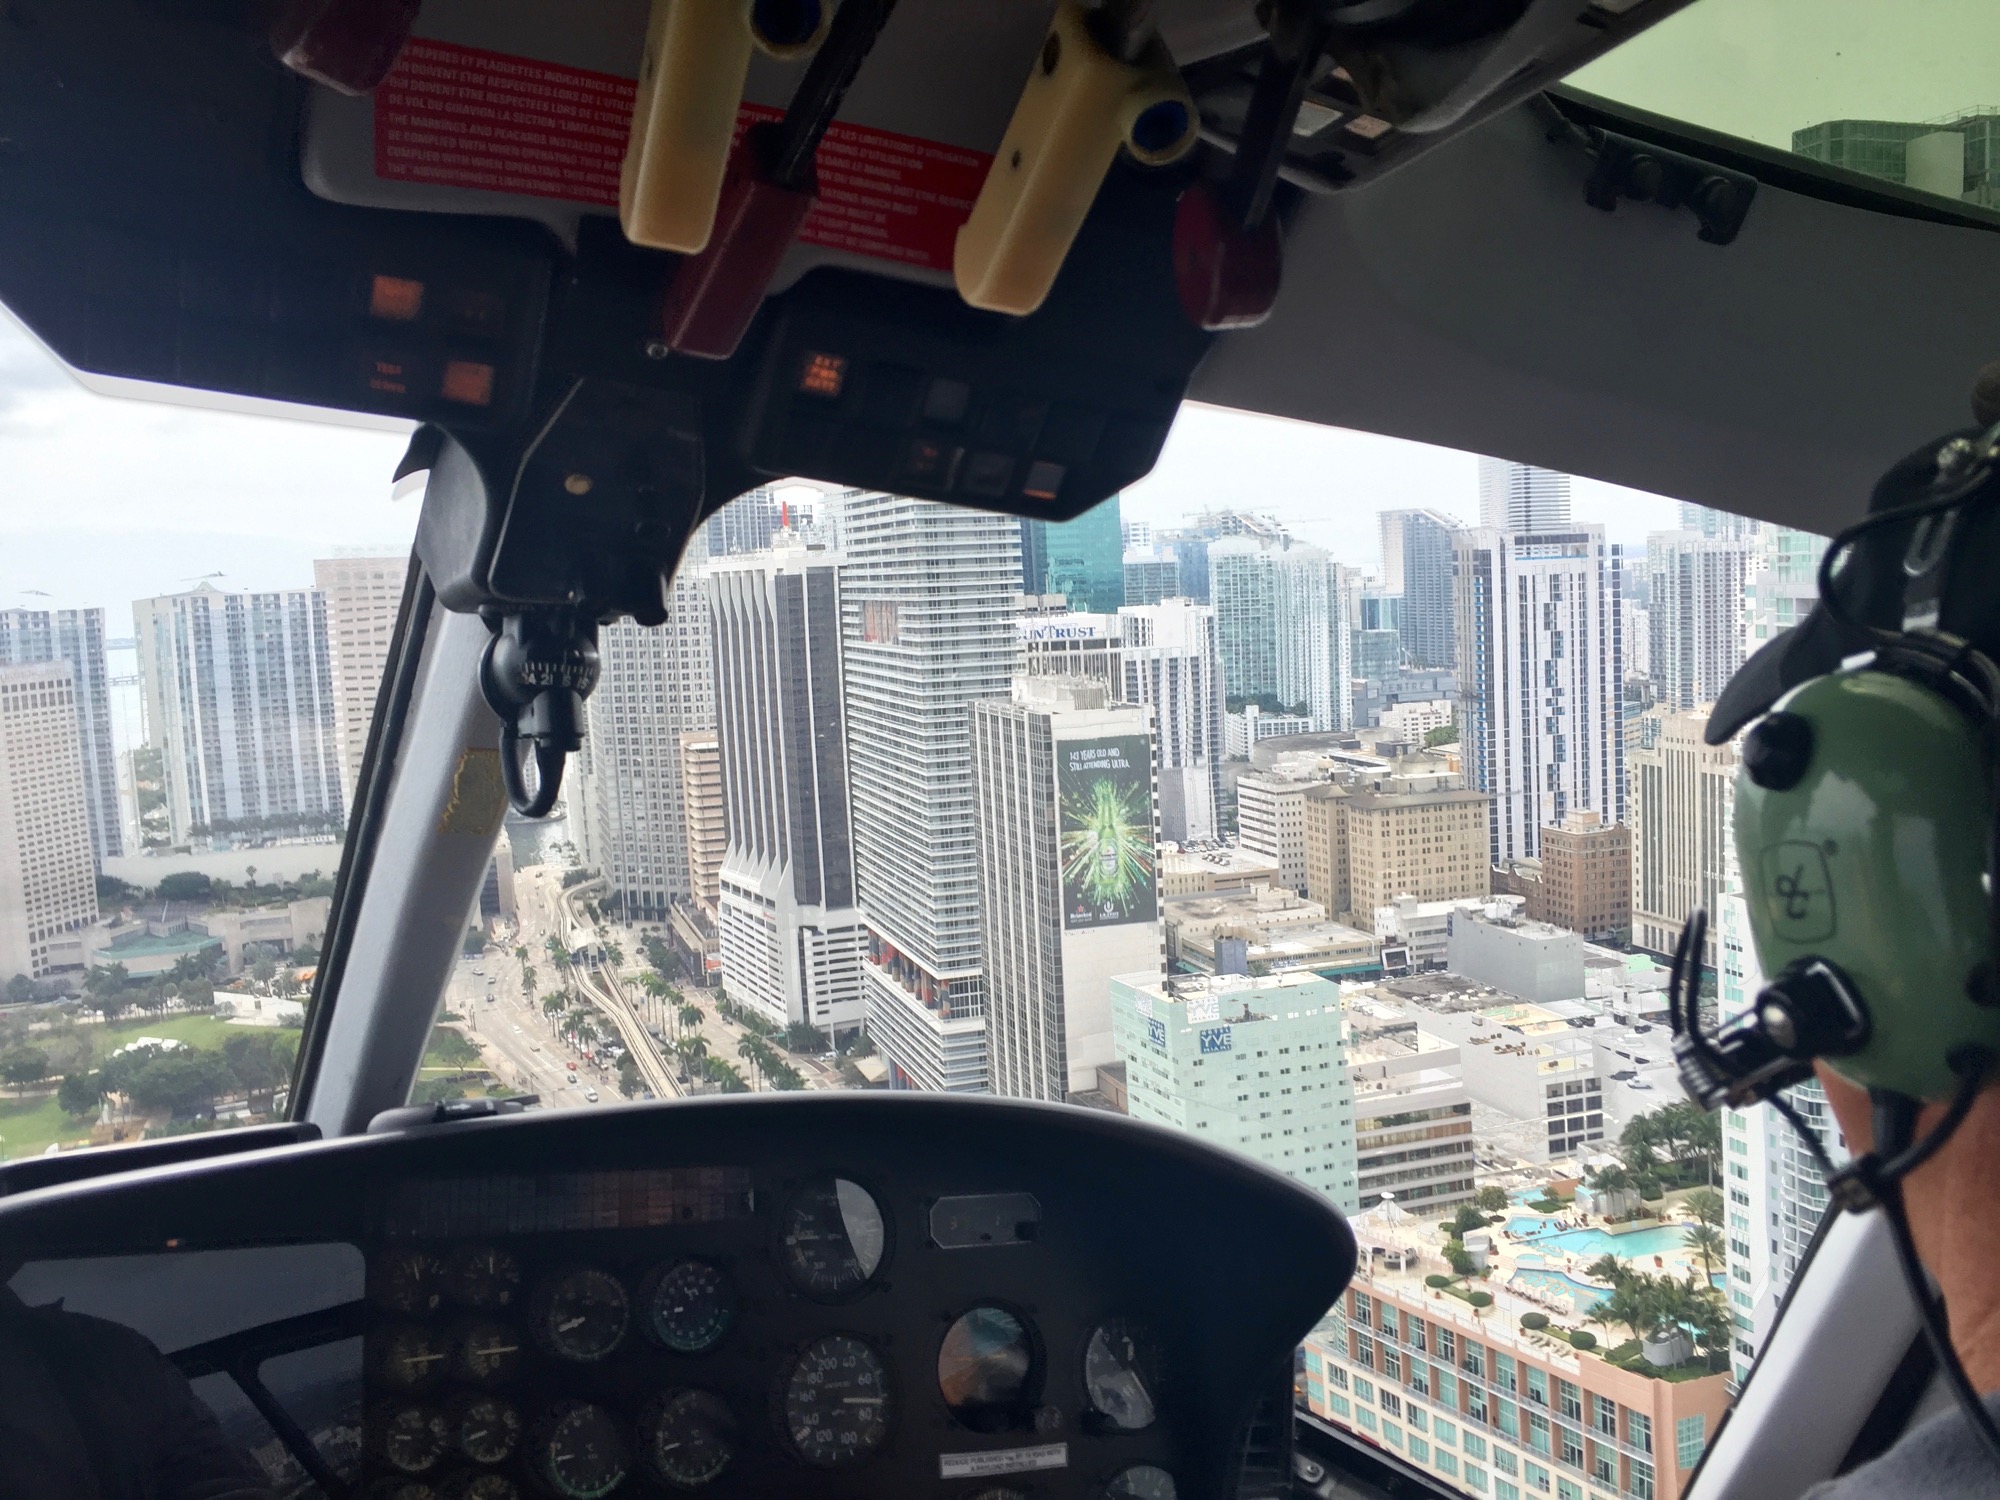 Miami Worldcenter Broke Ground Today & Celebrated With Helicopter Rides Over Miami